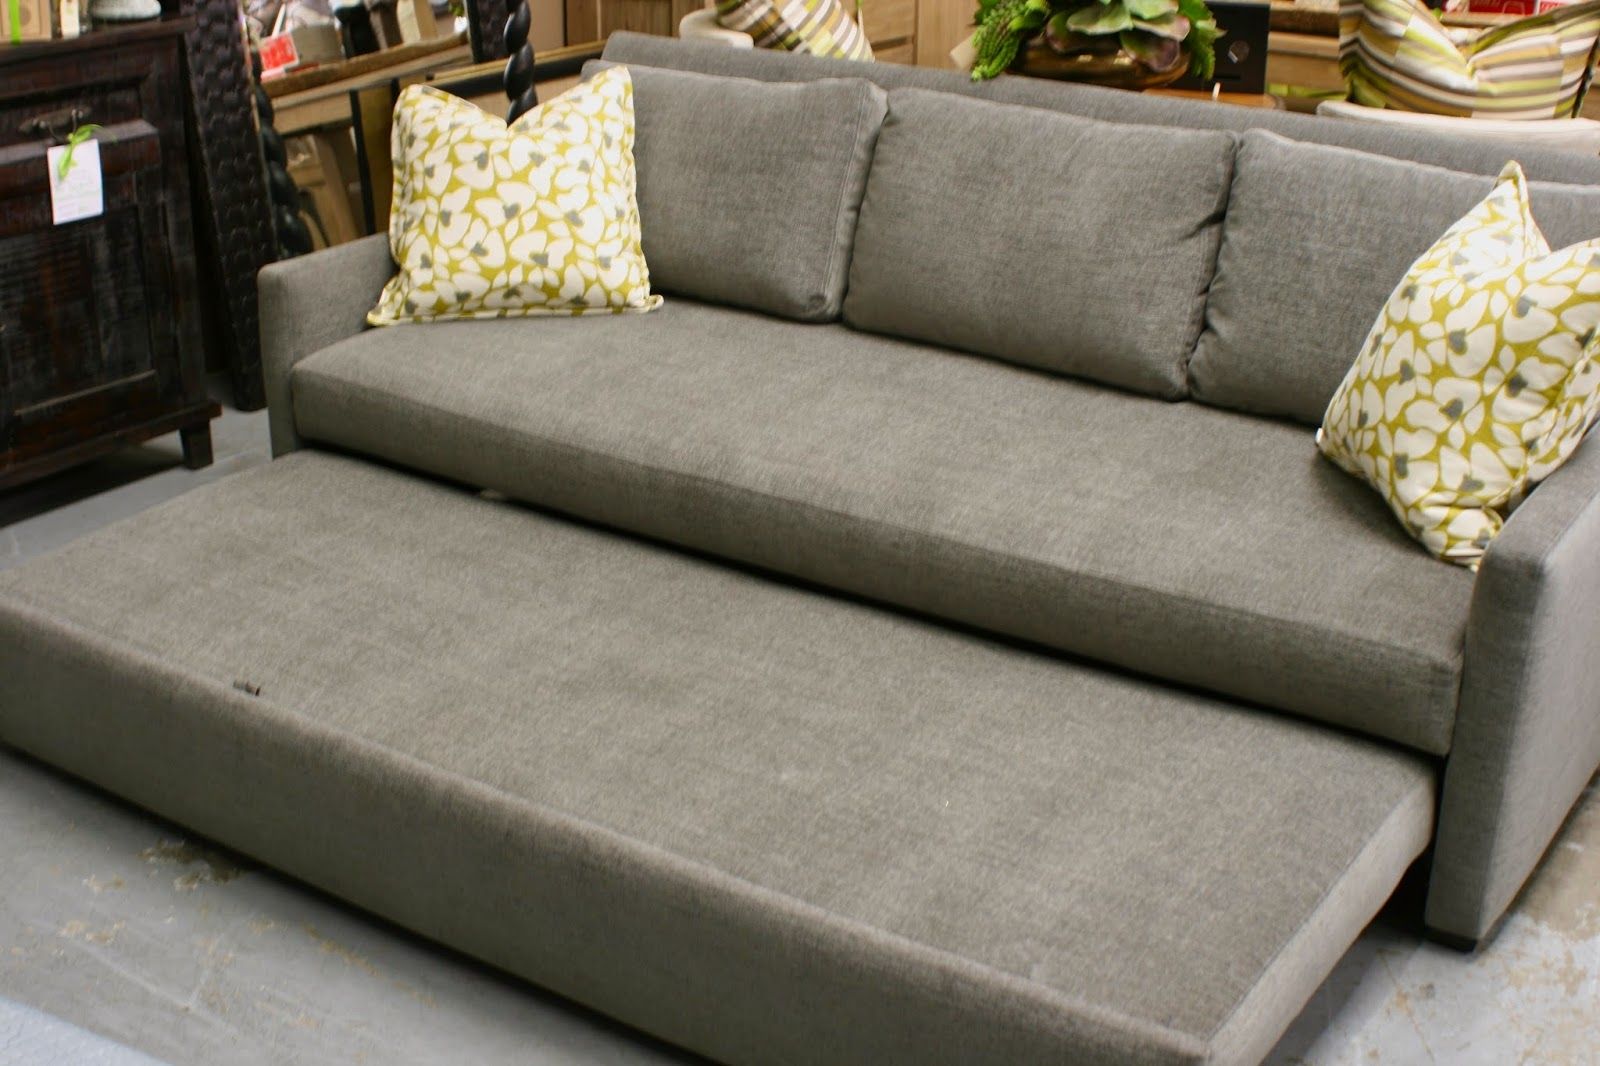 Queen Size Convertible Sofa Bed – Ideas On Foter Inside Queen Size Convertible Sofa Beds (View 2 of 20)